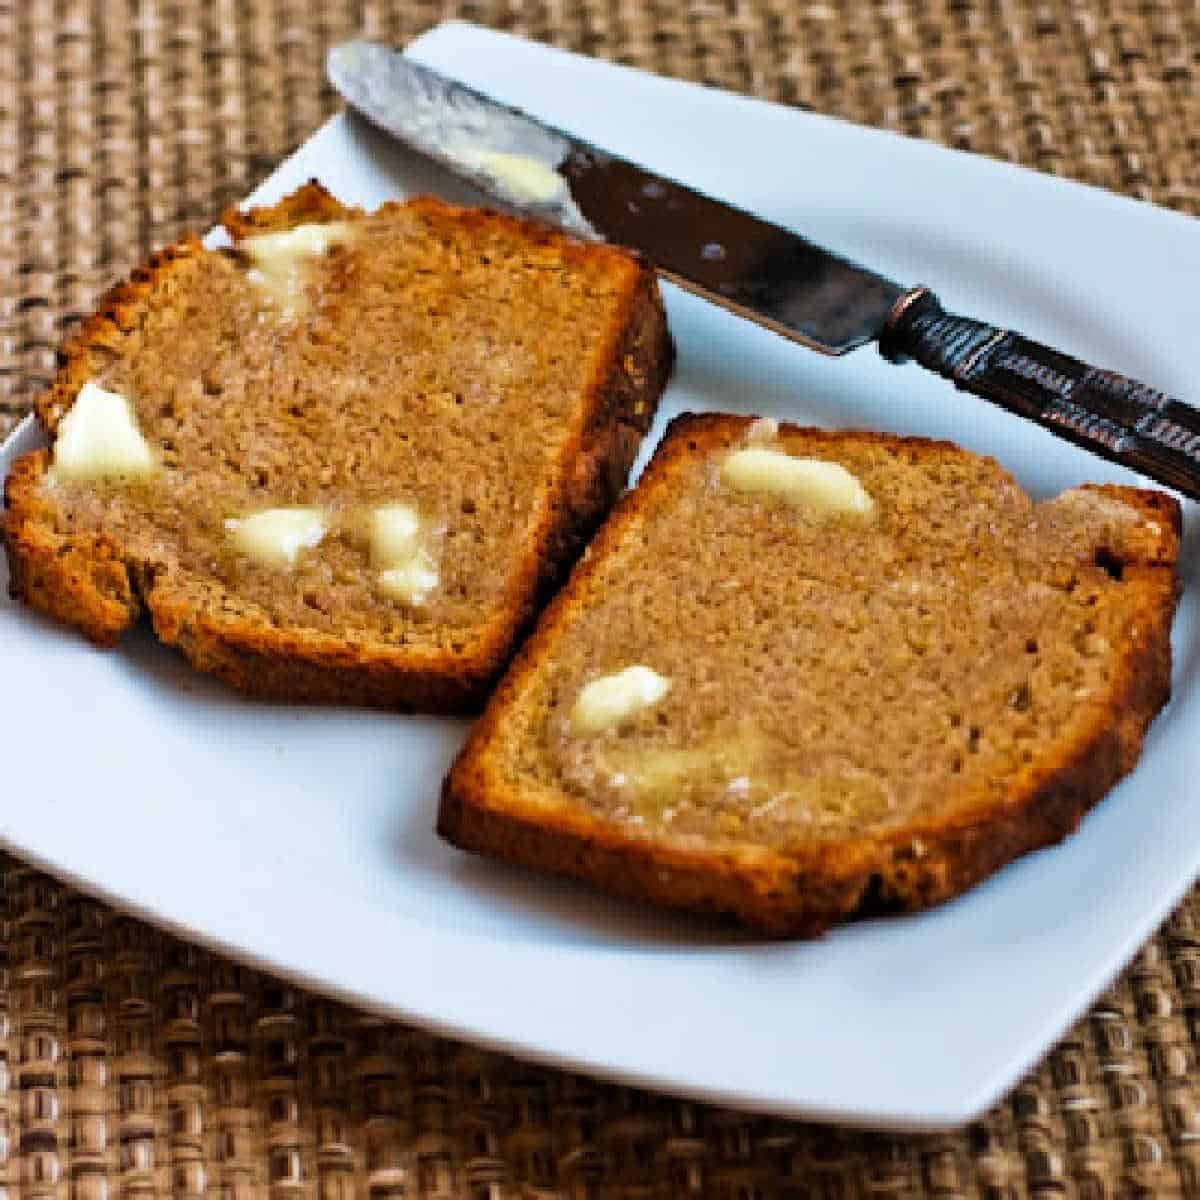 A square image of brown Irish soda bread with a knife and butter on a plate.